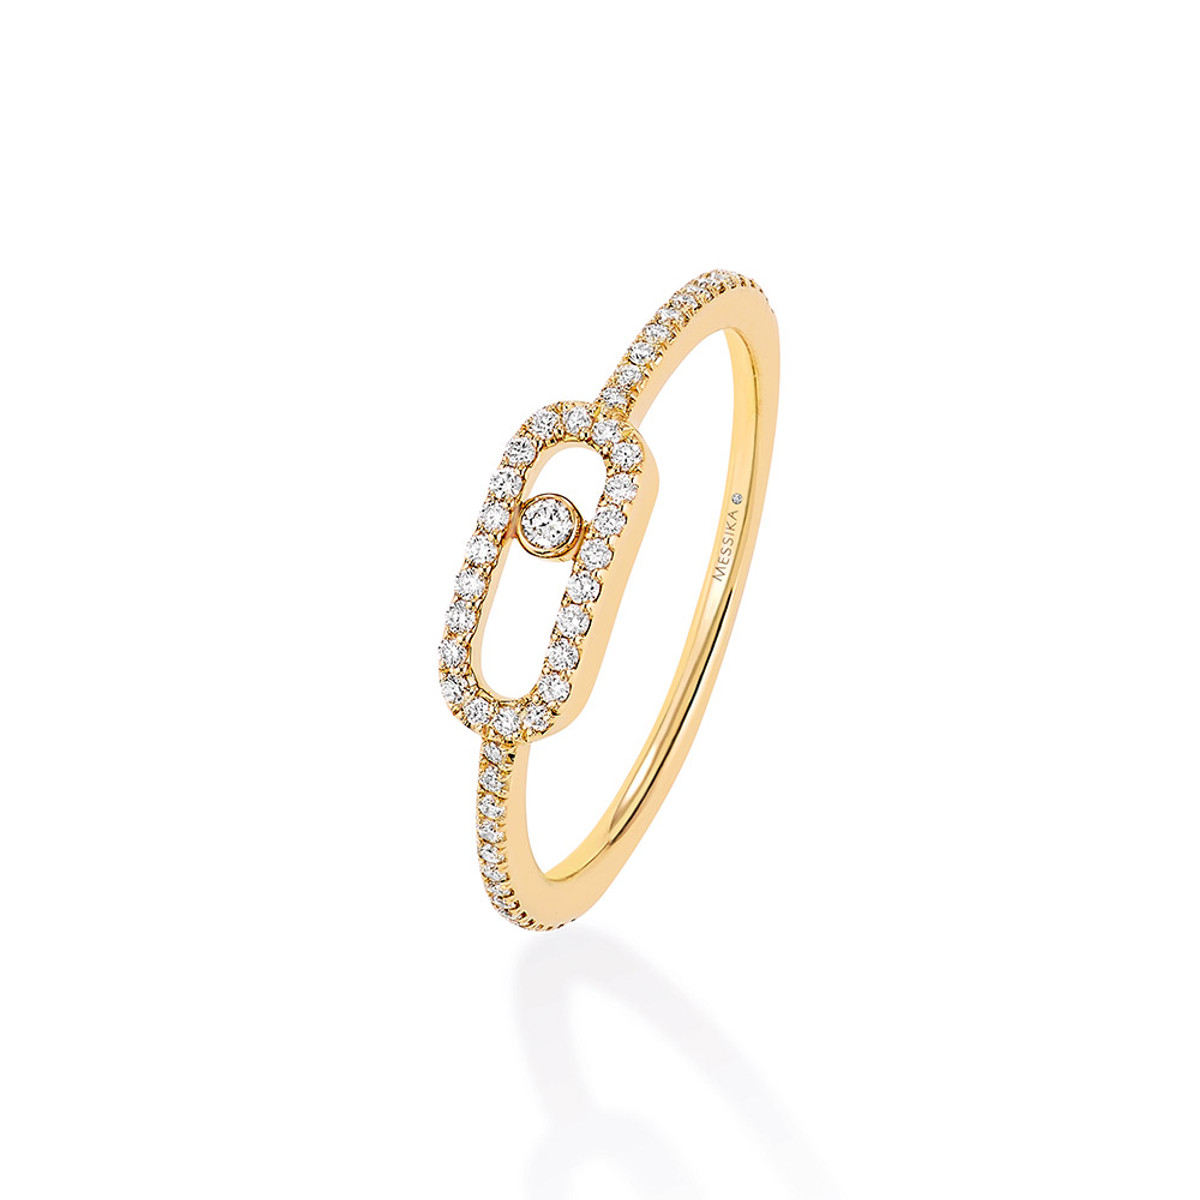 Messika Move Uno Pave Diamond Ring-37050 Product Image